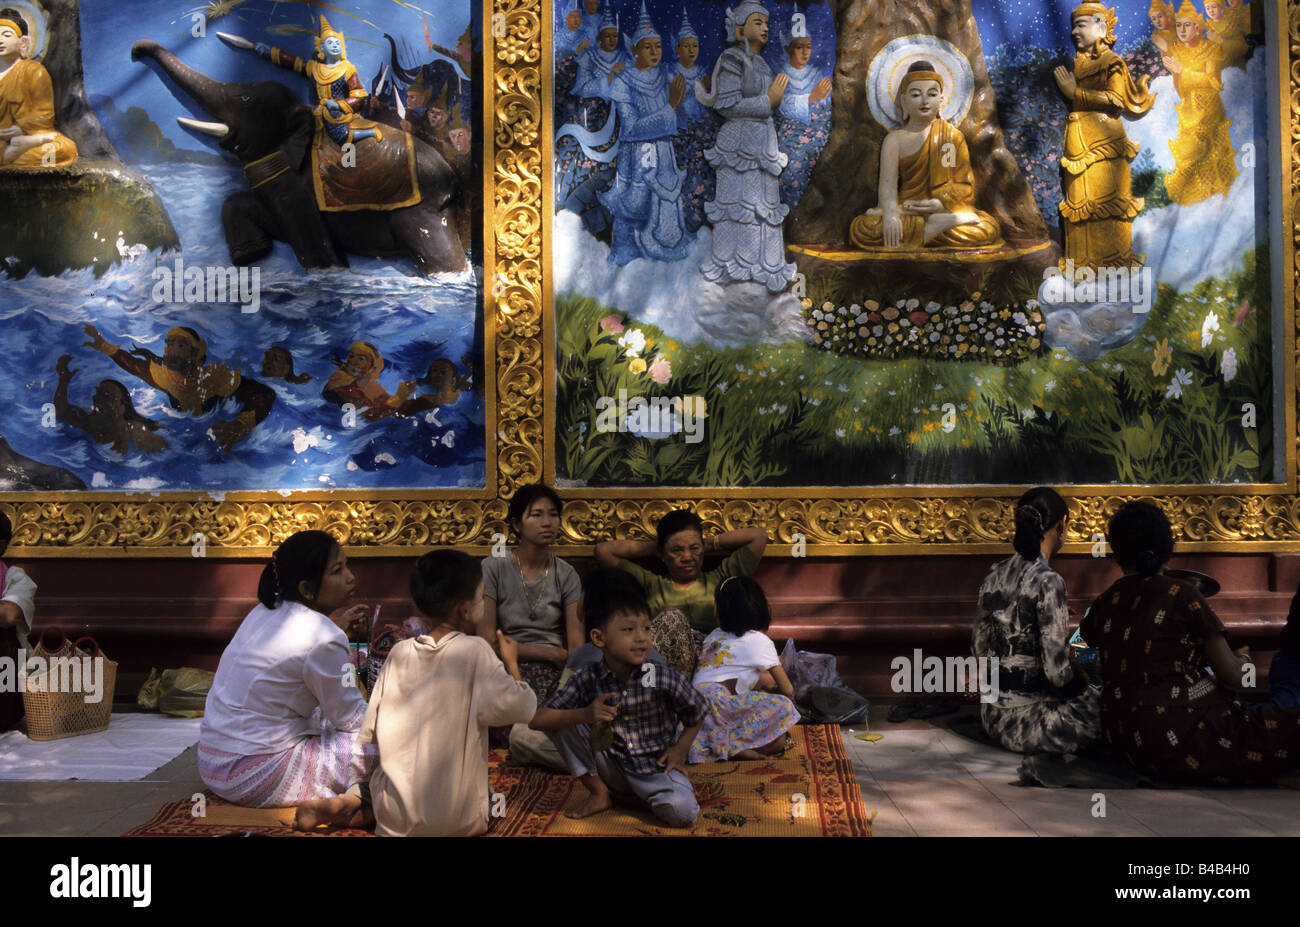 Families in front of wall paintings in the Shwedagon Pagode, Yangon, Union of Myanmar Stock Photo